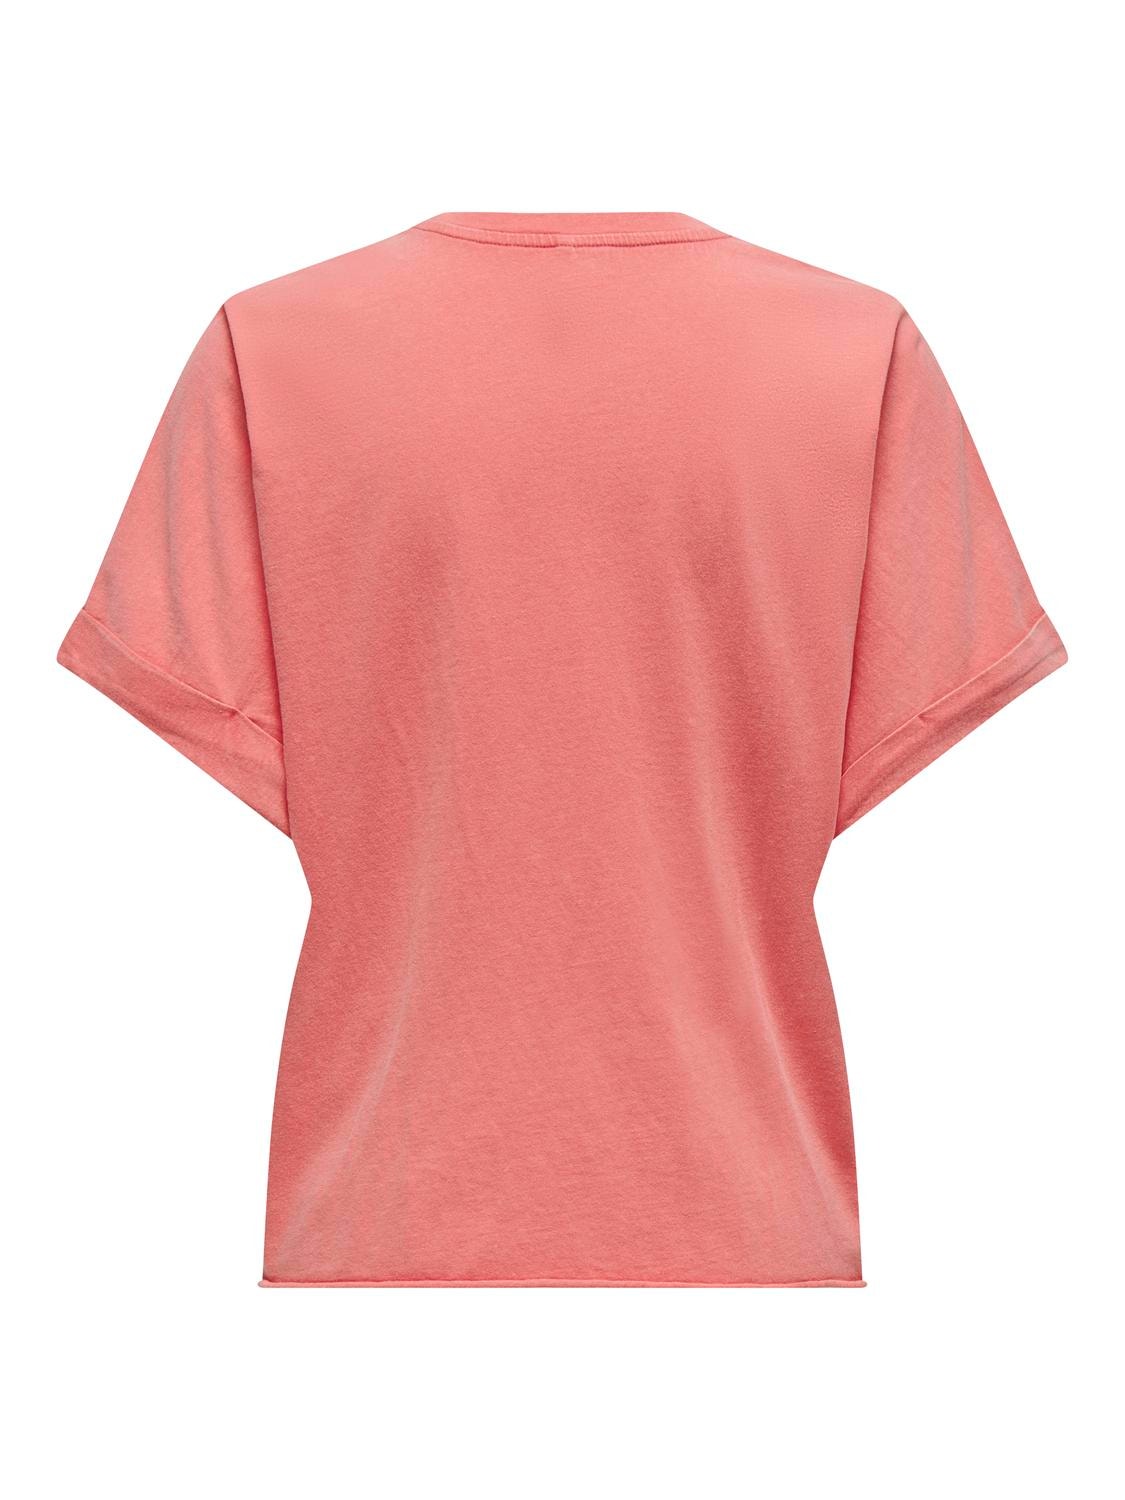 ONLY Regular Fit Round Neck T-Shirt -Rose of Sharon - 15316637